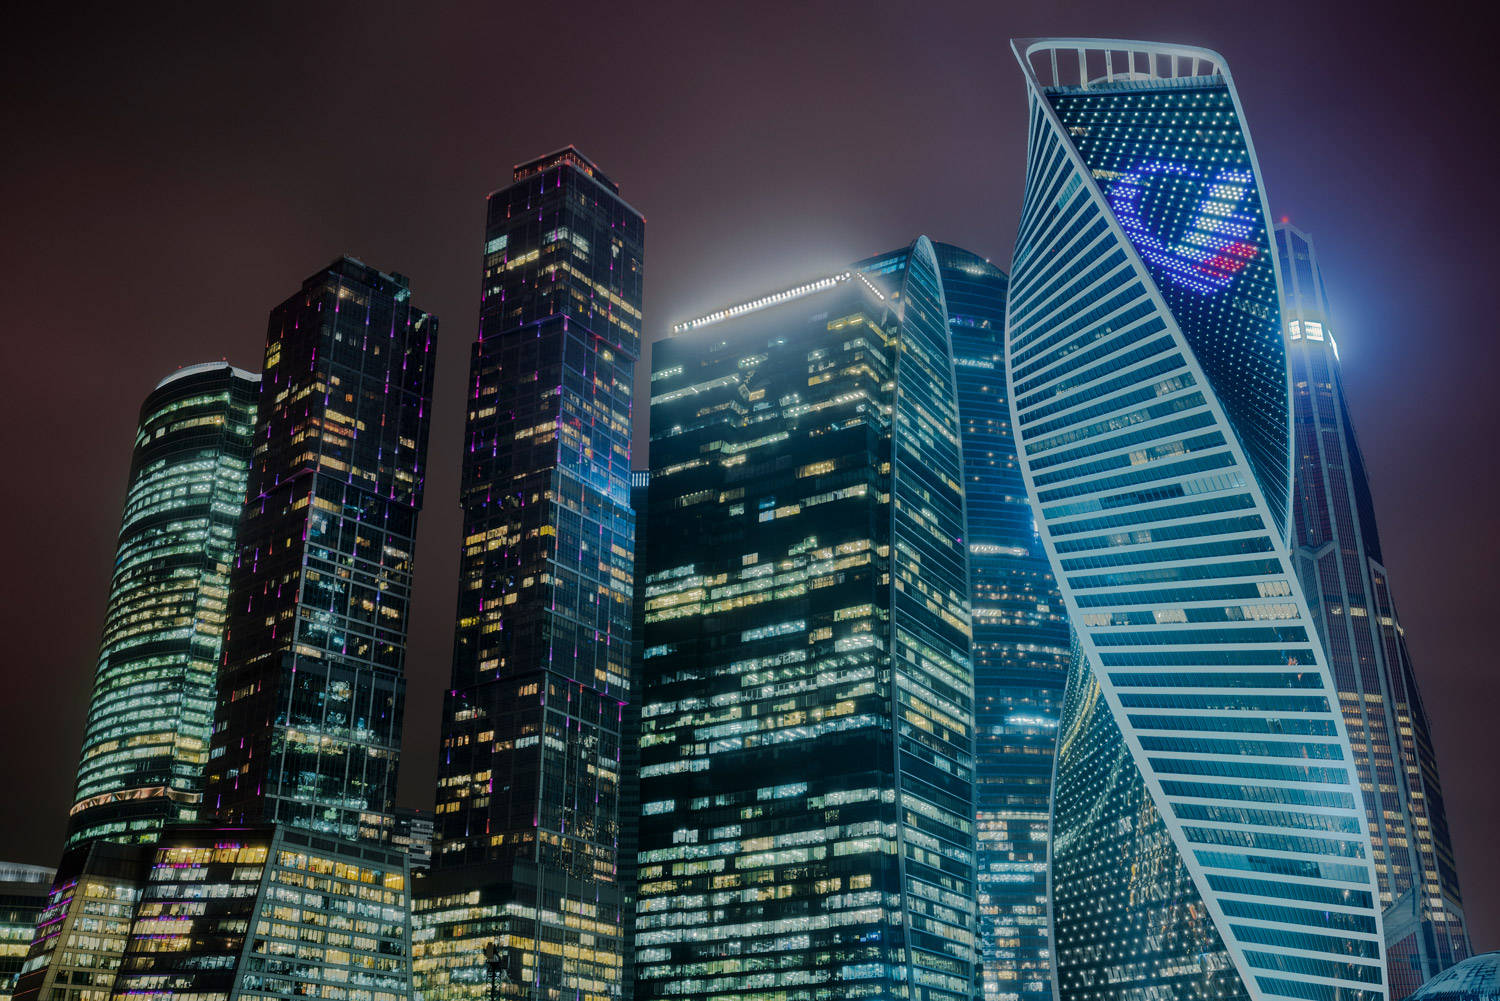 Moscow Illuminated Supertall Skyscrapers